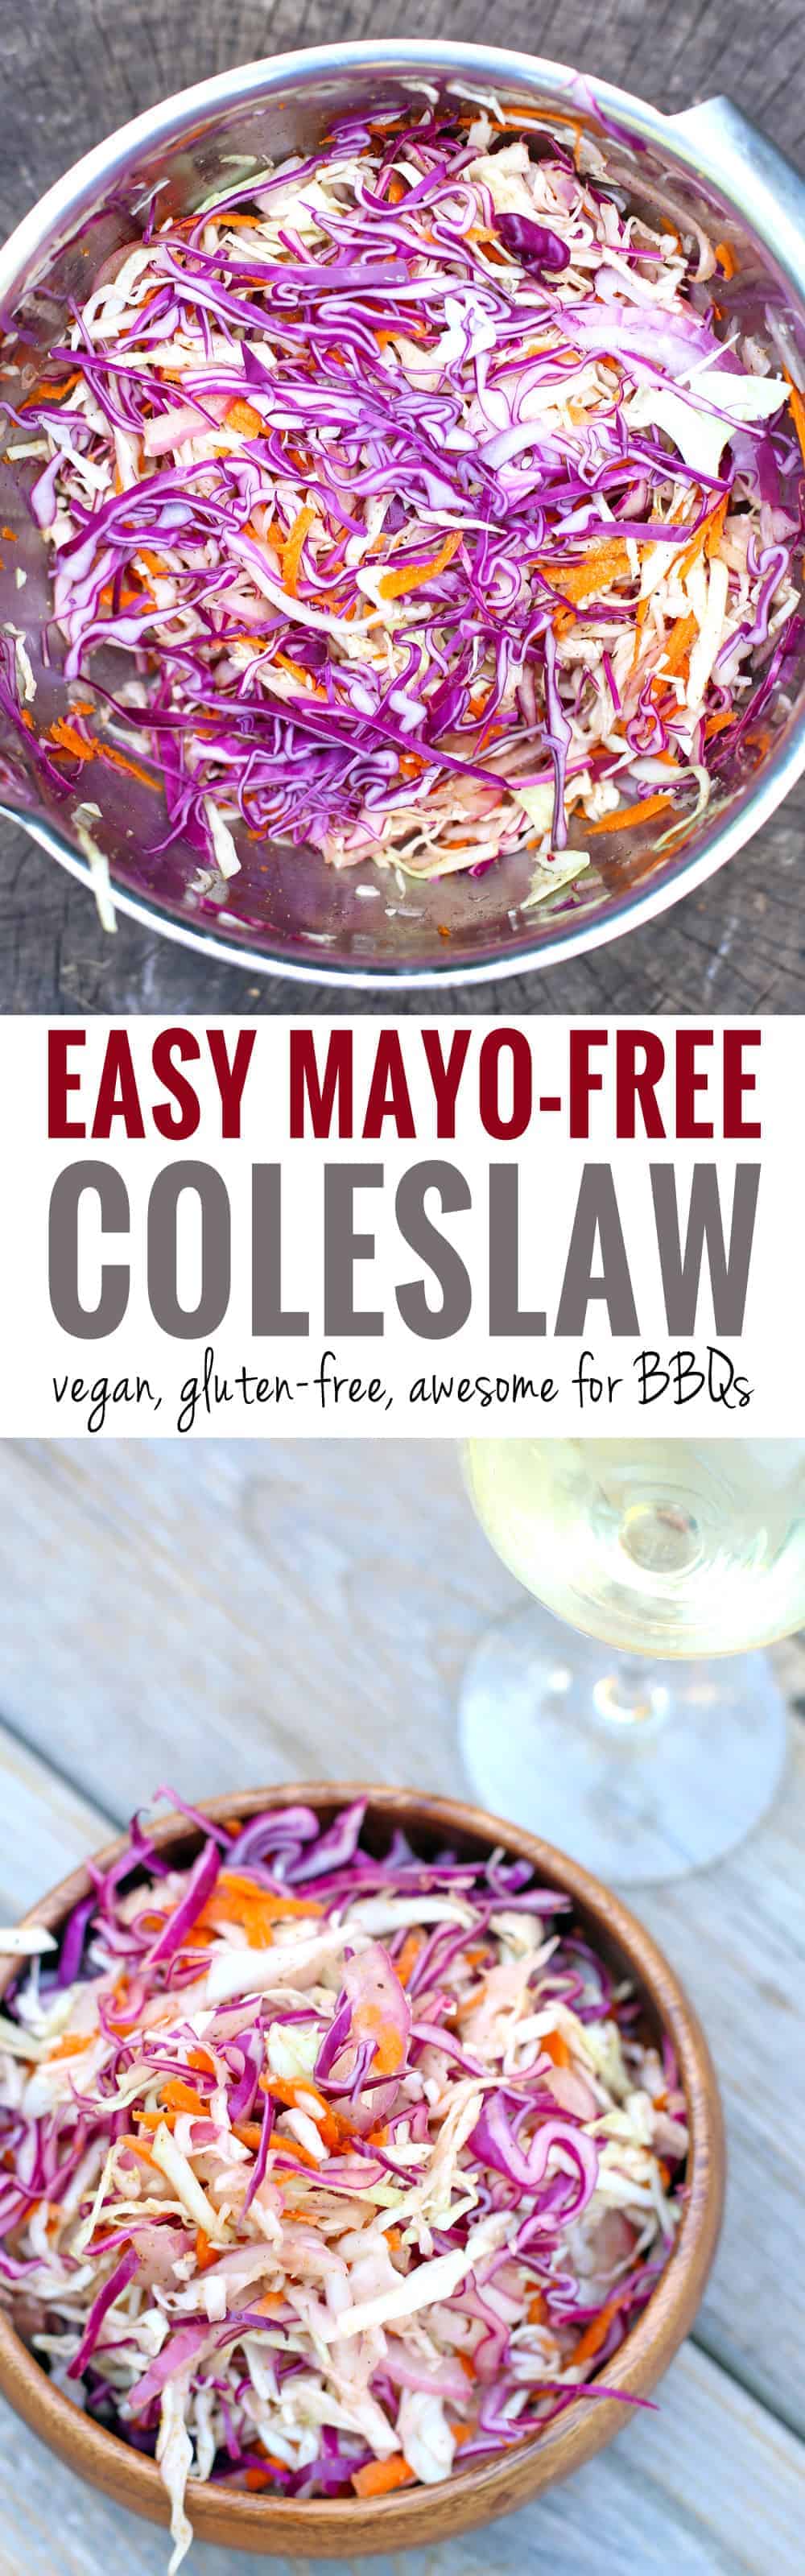 The Easiest Ever Mayo-Free Coleslaw. Vegan, gluten-free, and perfect for BBQs!